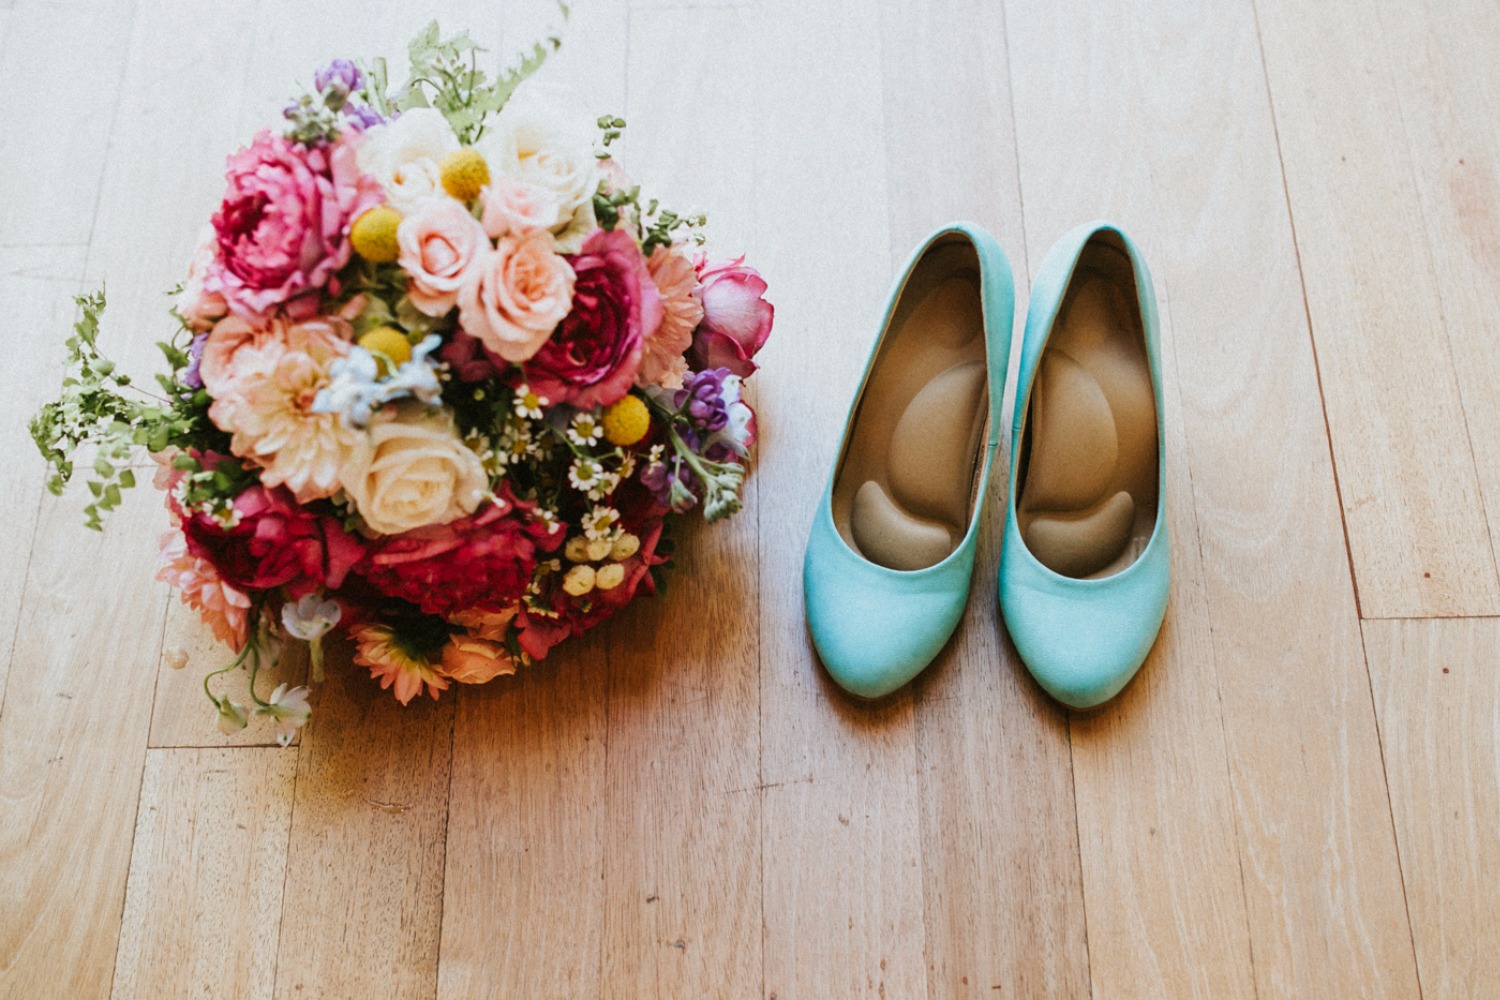 Teal wedding shoes and bouquet